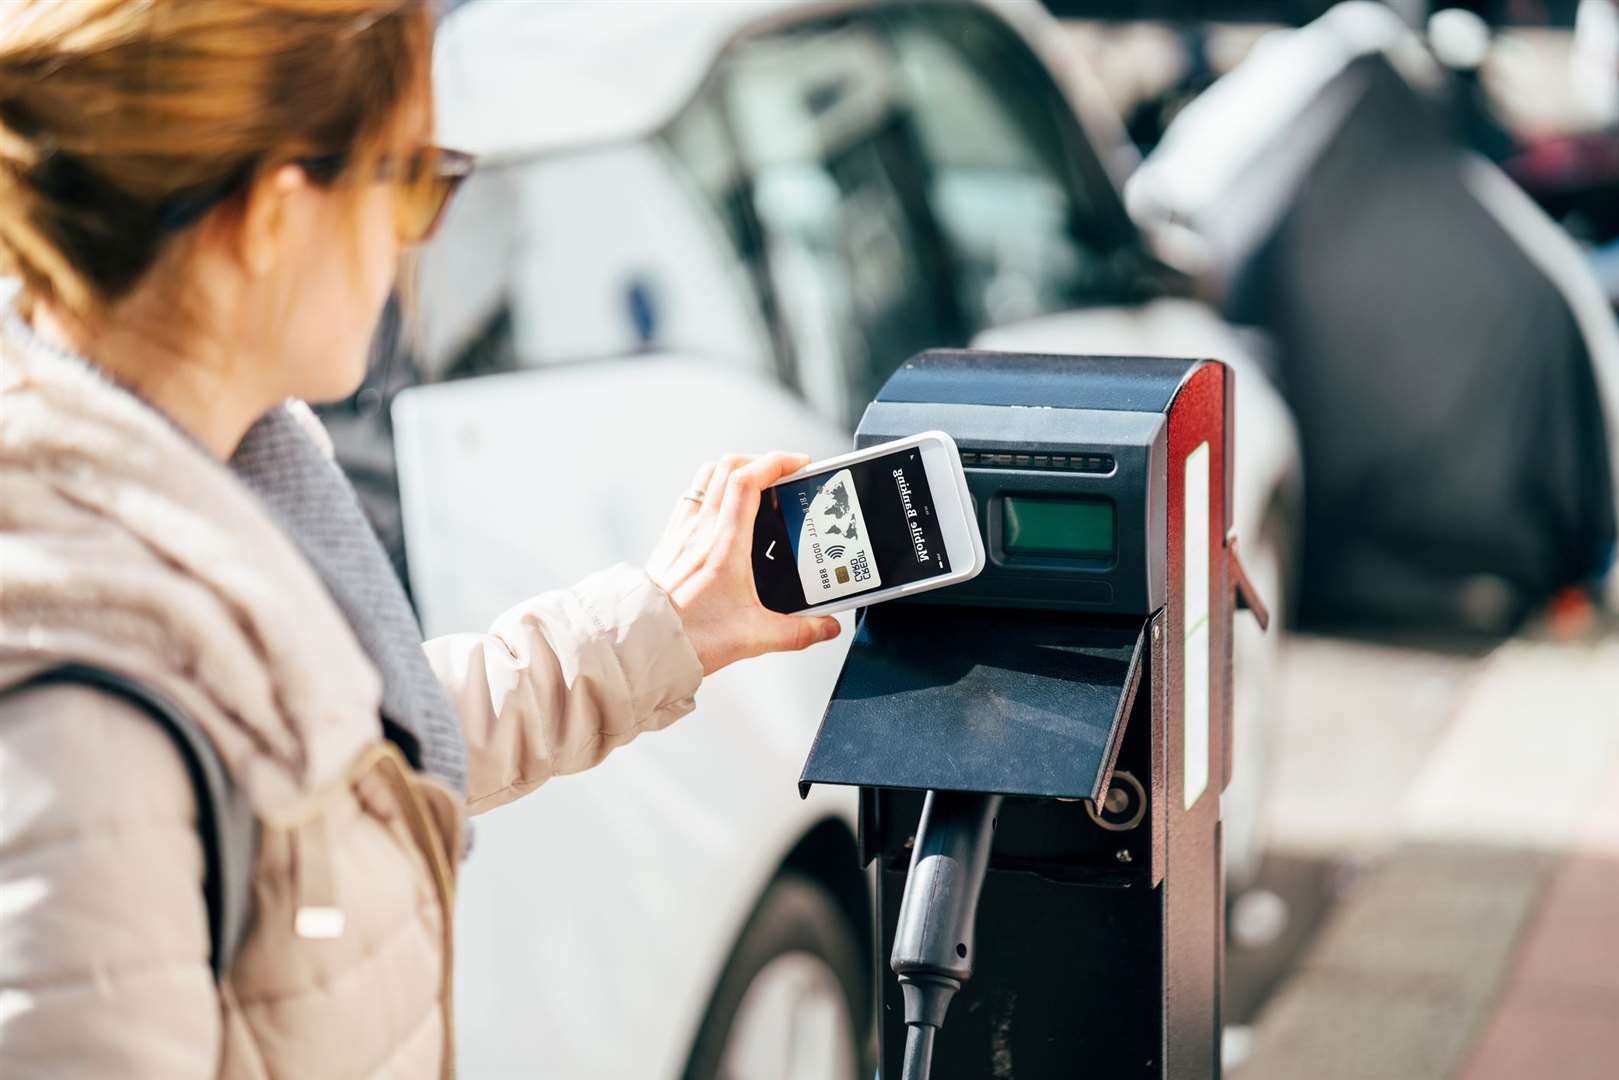 Customer paying with digital wallet at electric vehicle charging station in UK,London.